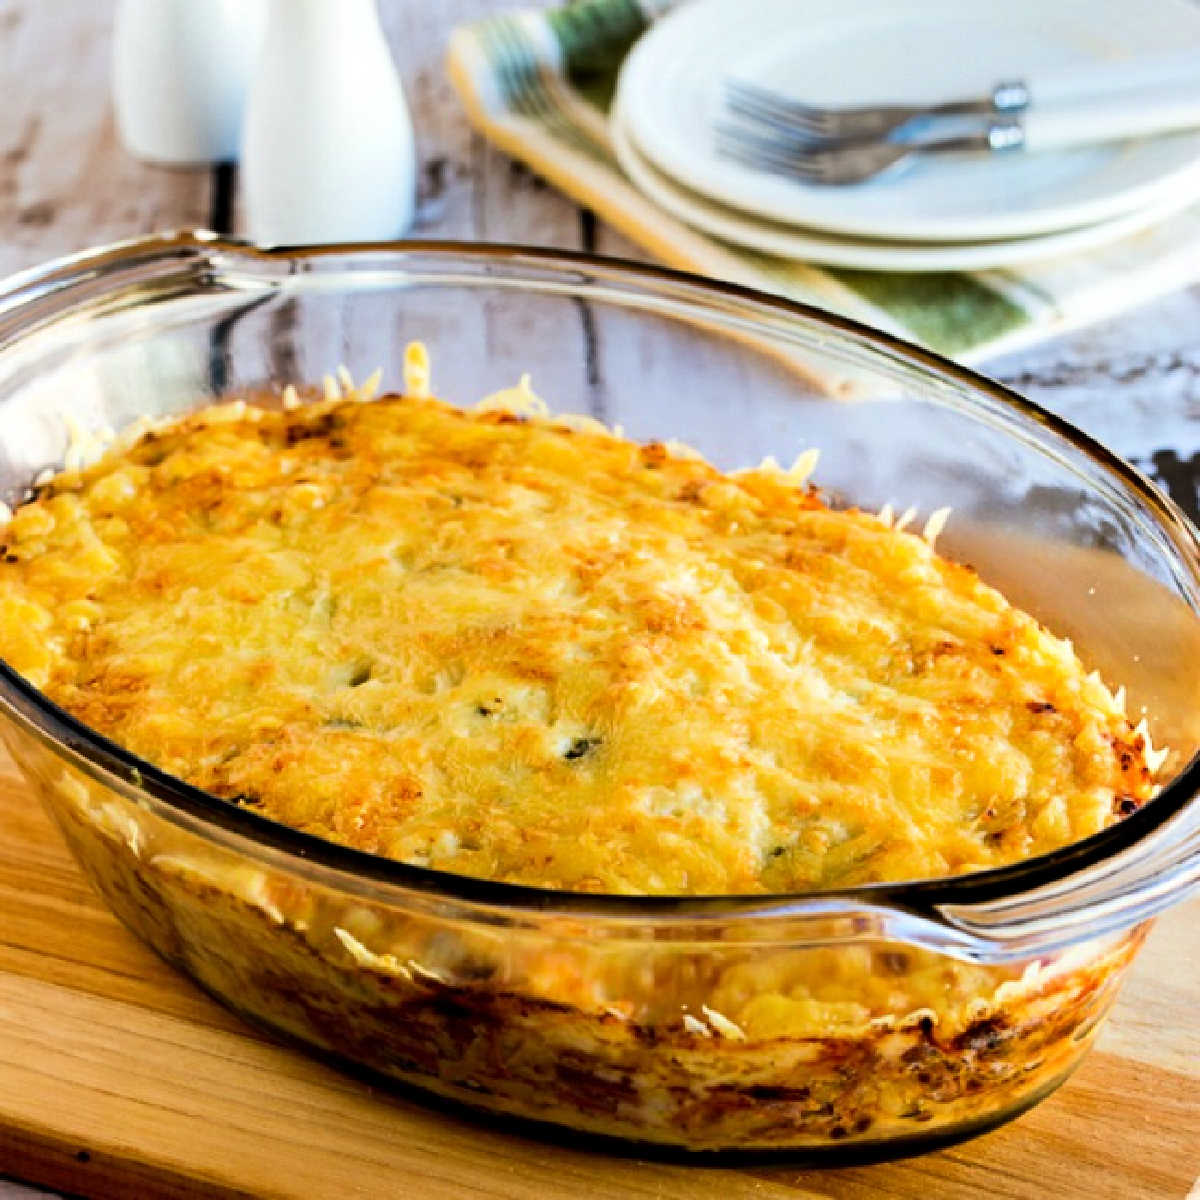 Square image of Low-Carb Reuben Bake shown in casserole dish with plates, fork, salt, and pepper.